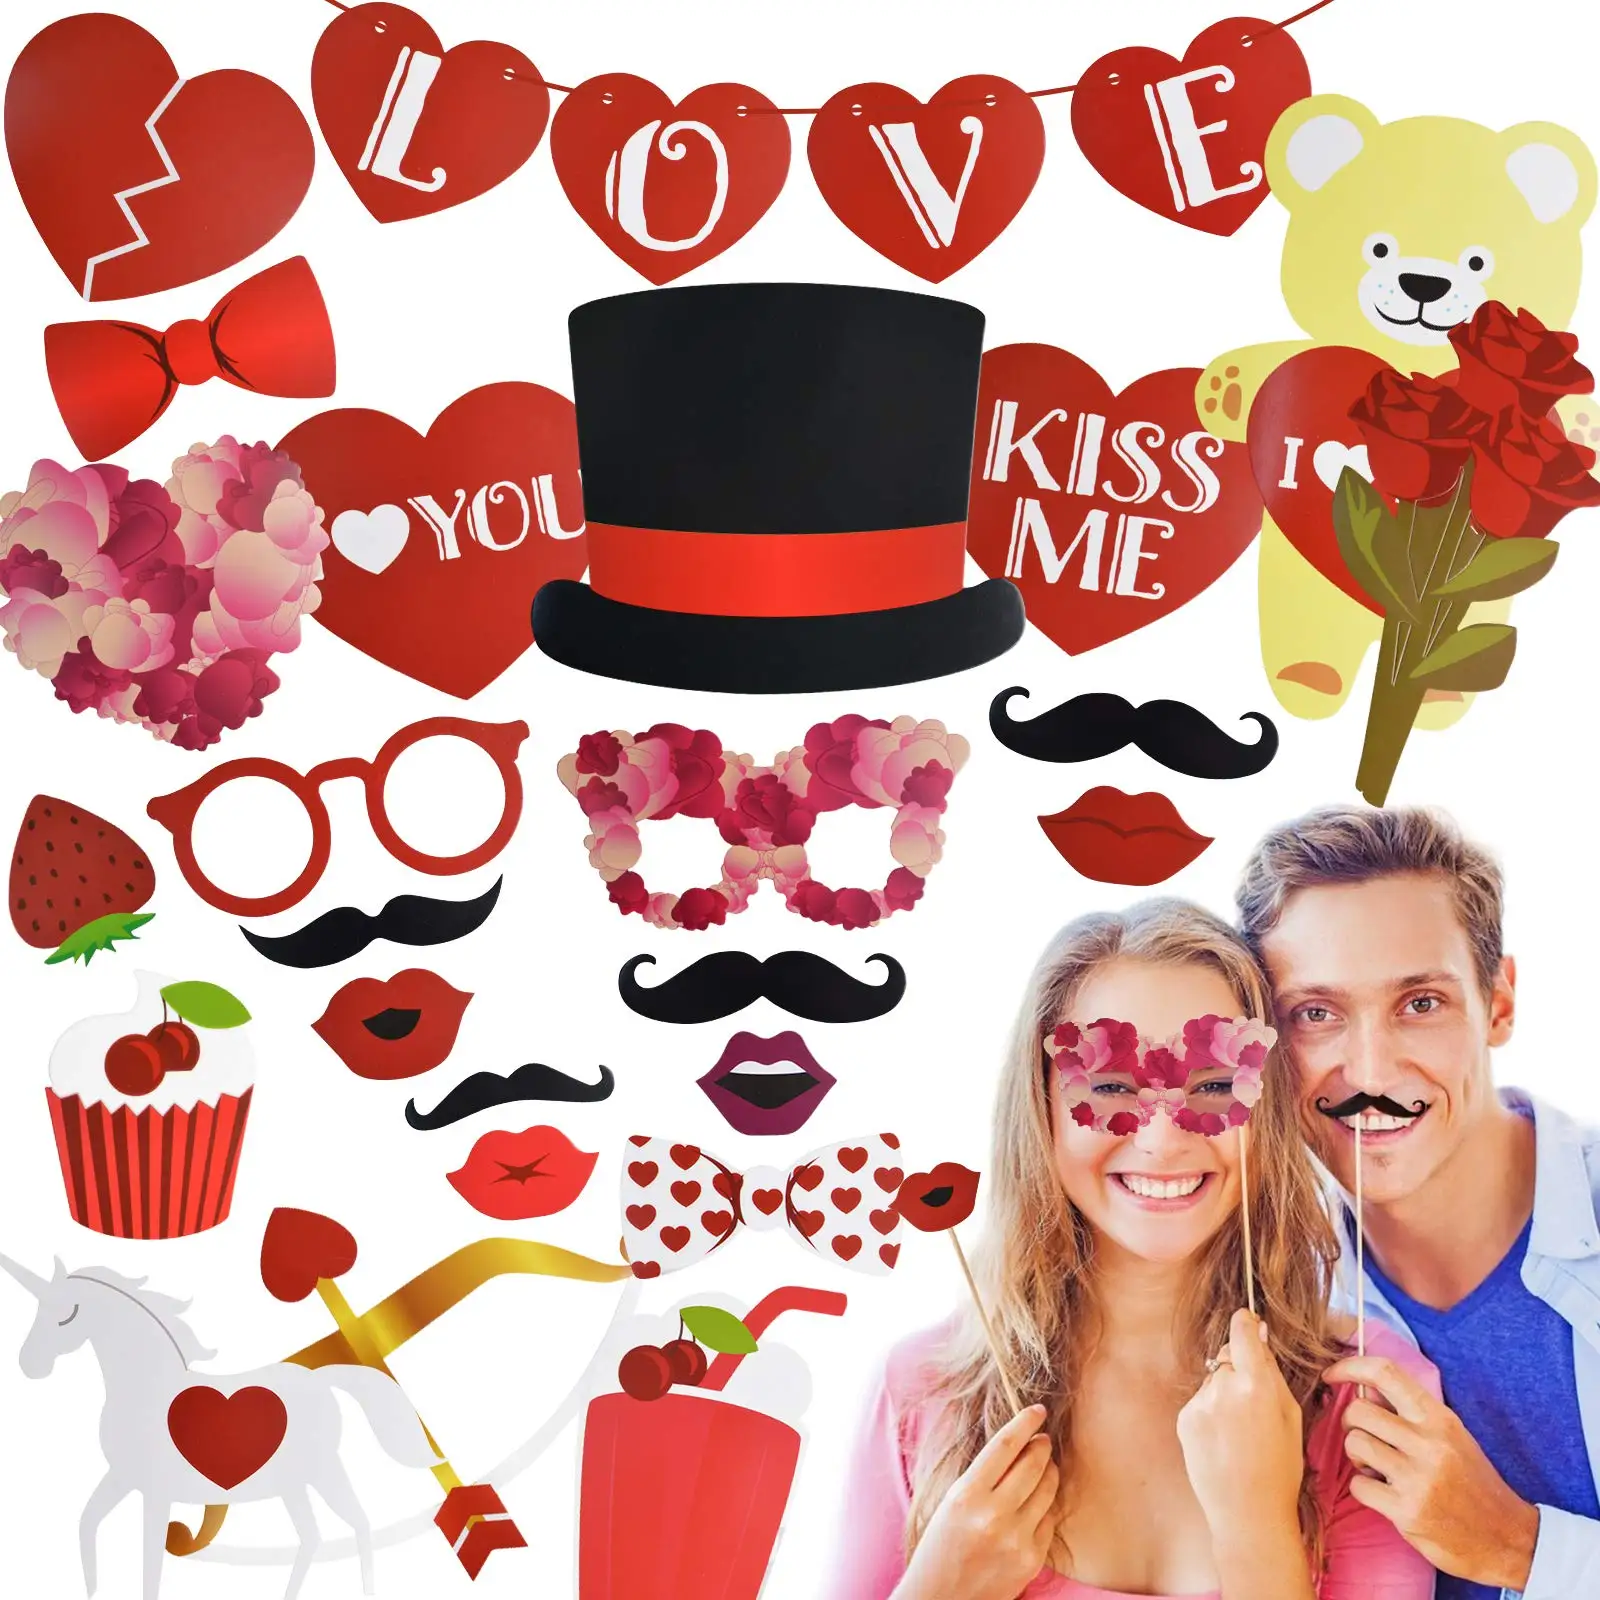 

35Pcs Valentines Day Wedding Photo Booth Props DIY Required Party Decorations Supplies with Sticks Favors Mustache on a stick